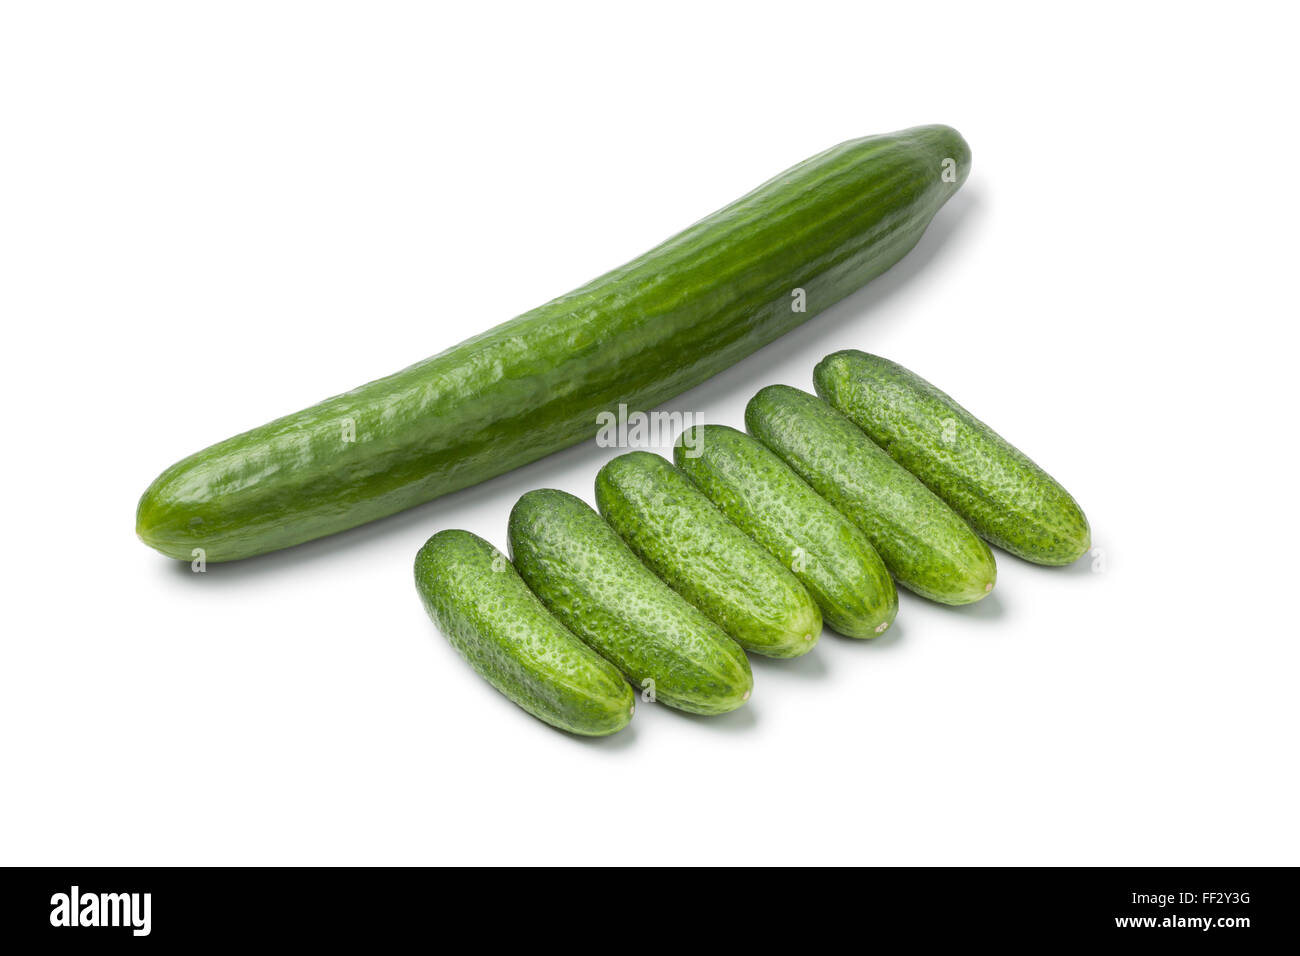 https://c8.alamy.com/comp/FF2Y3G/fresh-mini-cucumbers-compared-with-a-large-one-on-white-background-FF2Y3G.jpg